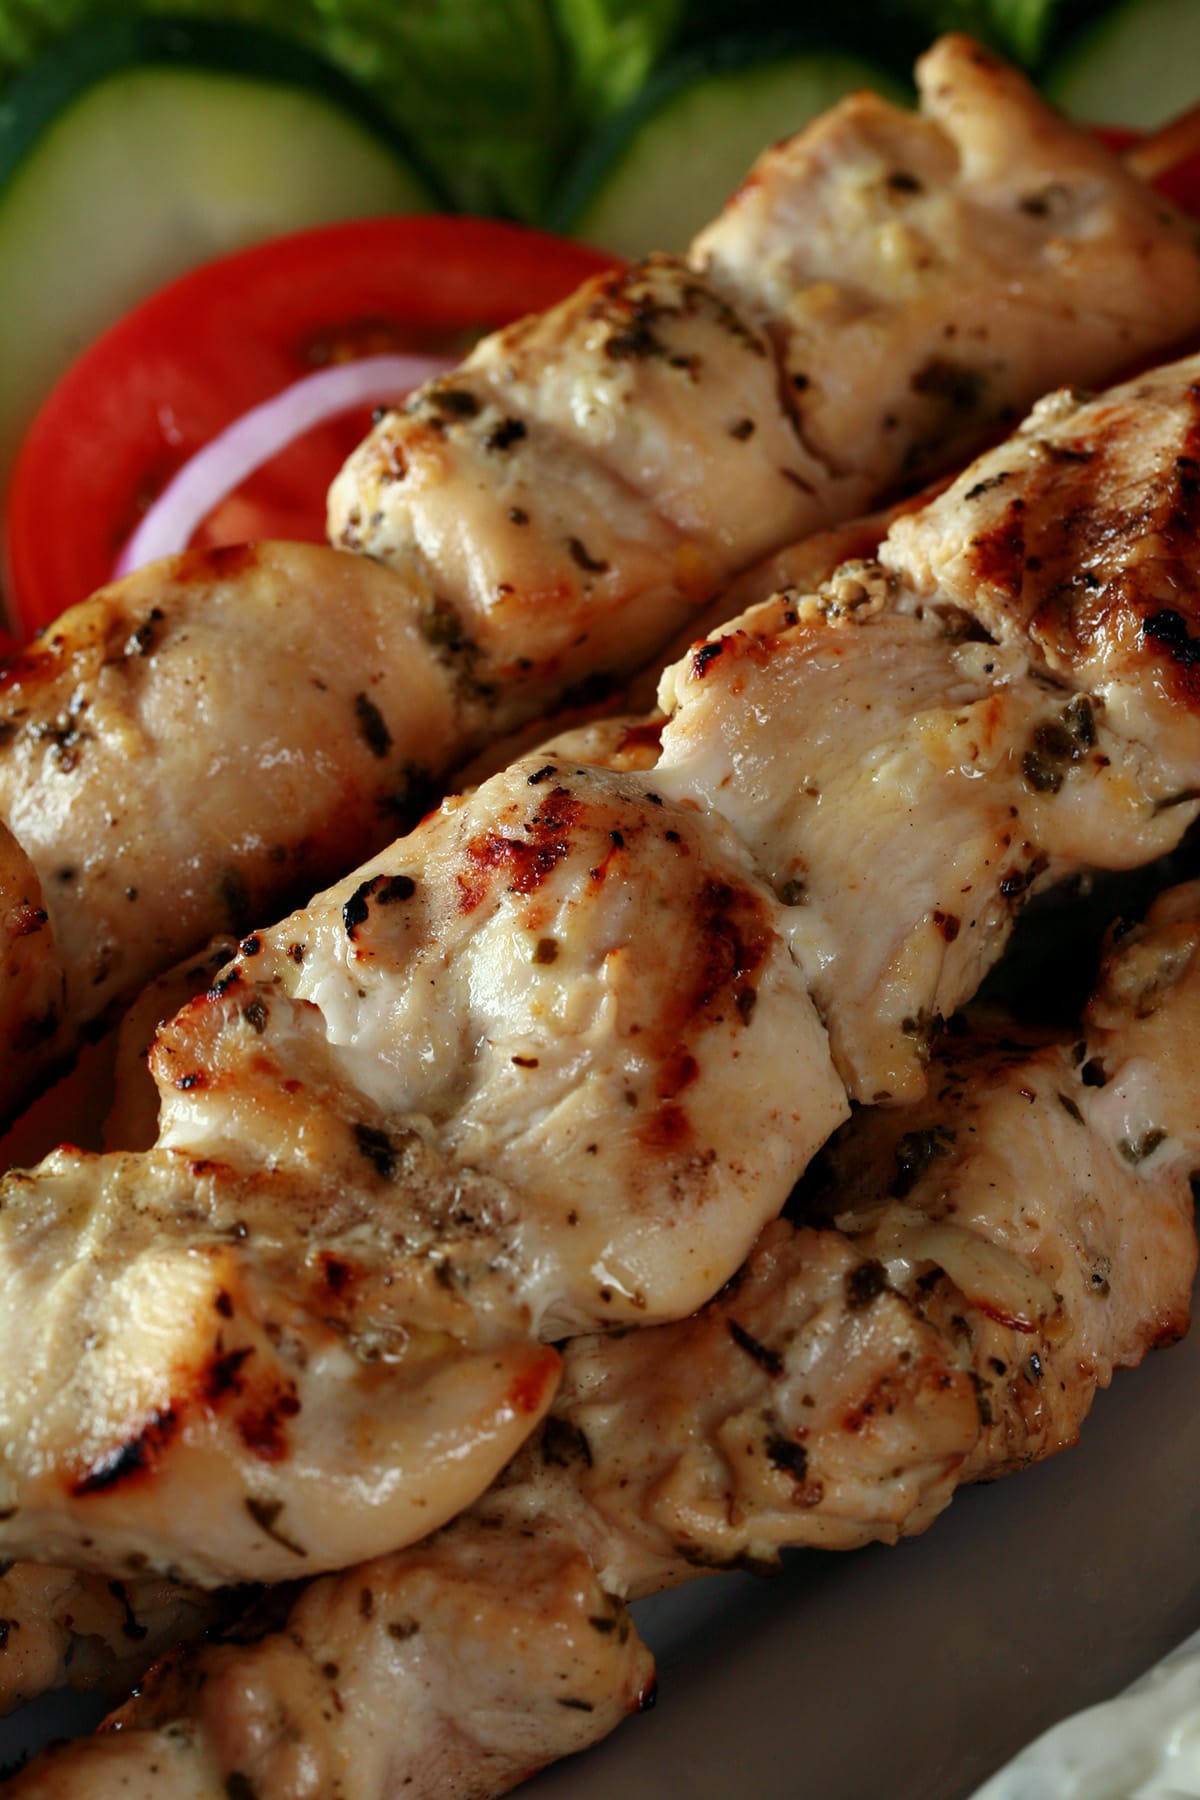 Several grilled chicken soulaki skewers on a platter with red onions, tomatoes, and cucumber slices.